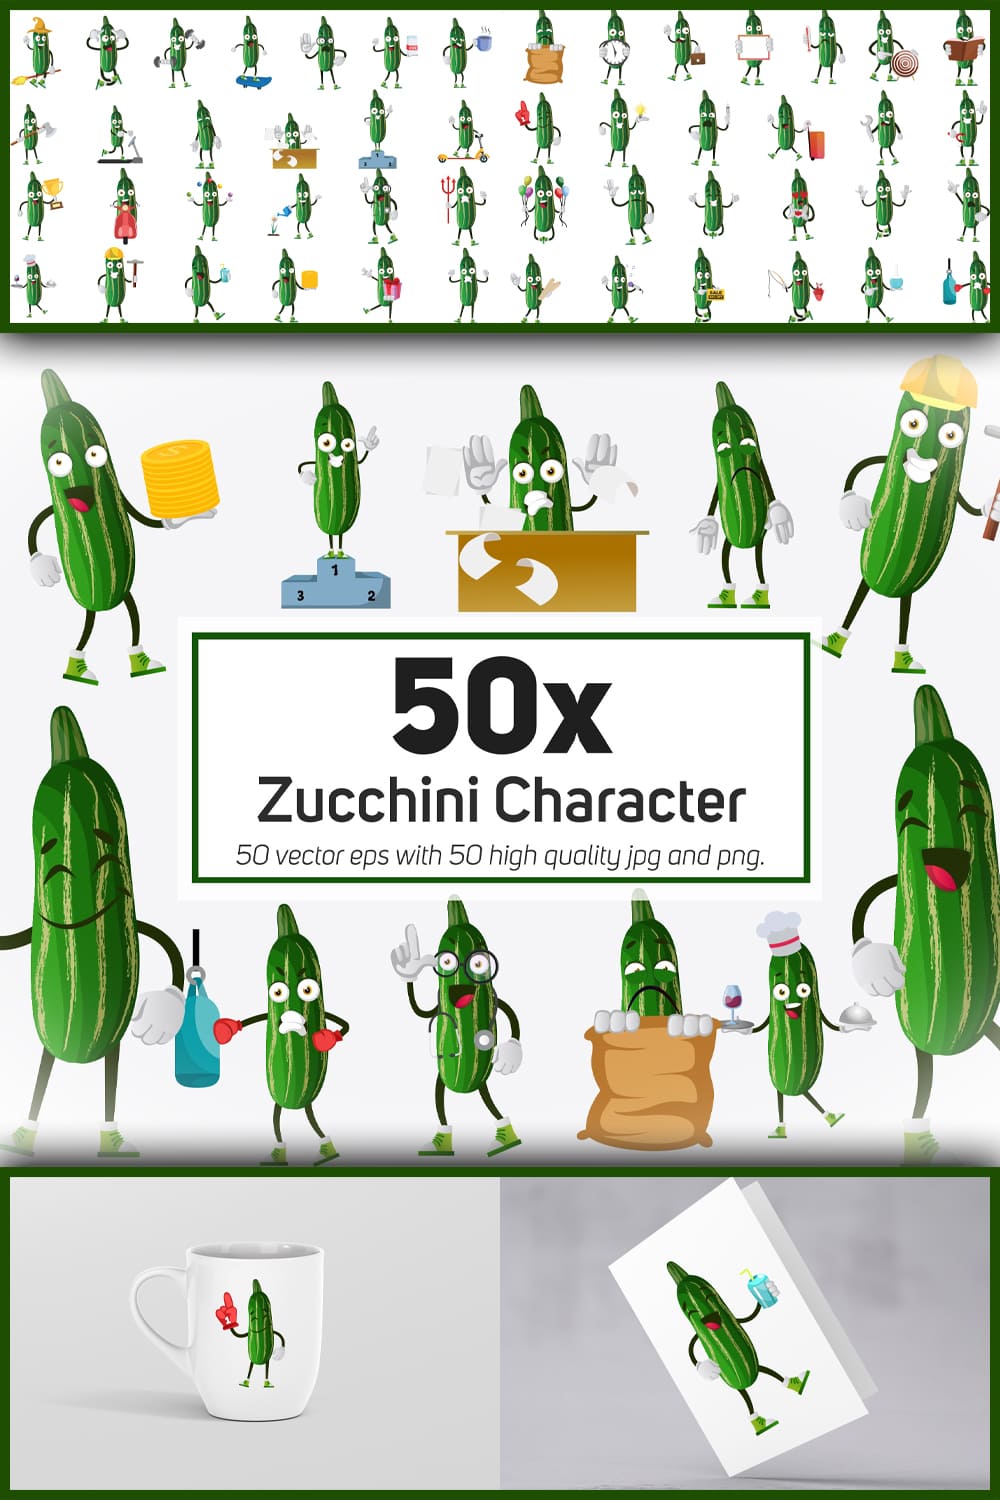 542381 50x zucchini character and mascot collection illus pinterest 1000 1500 773